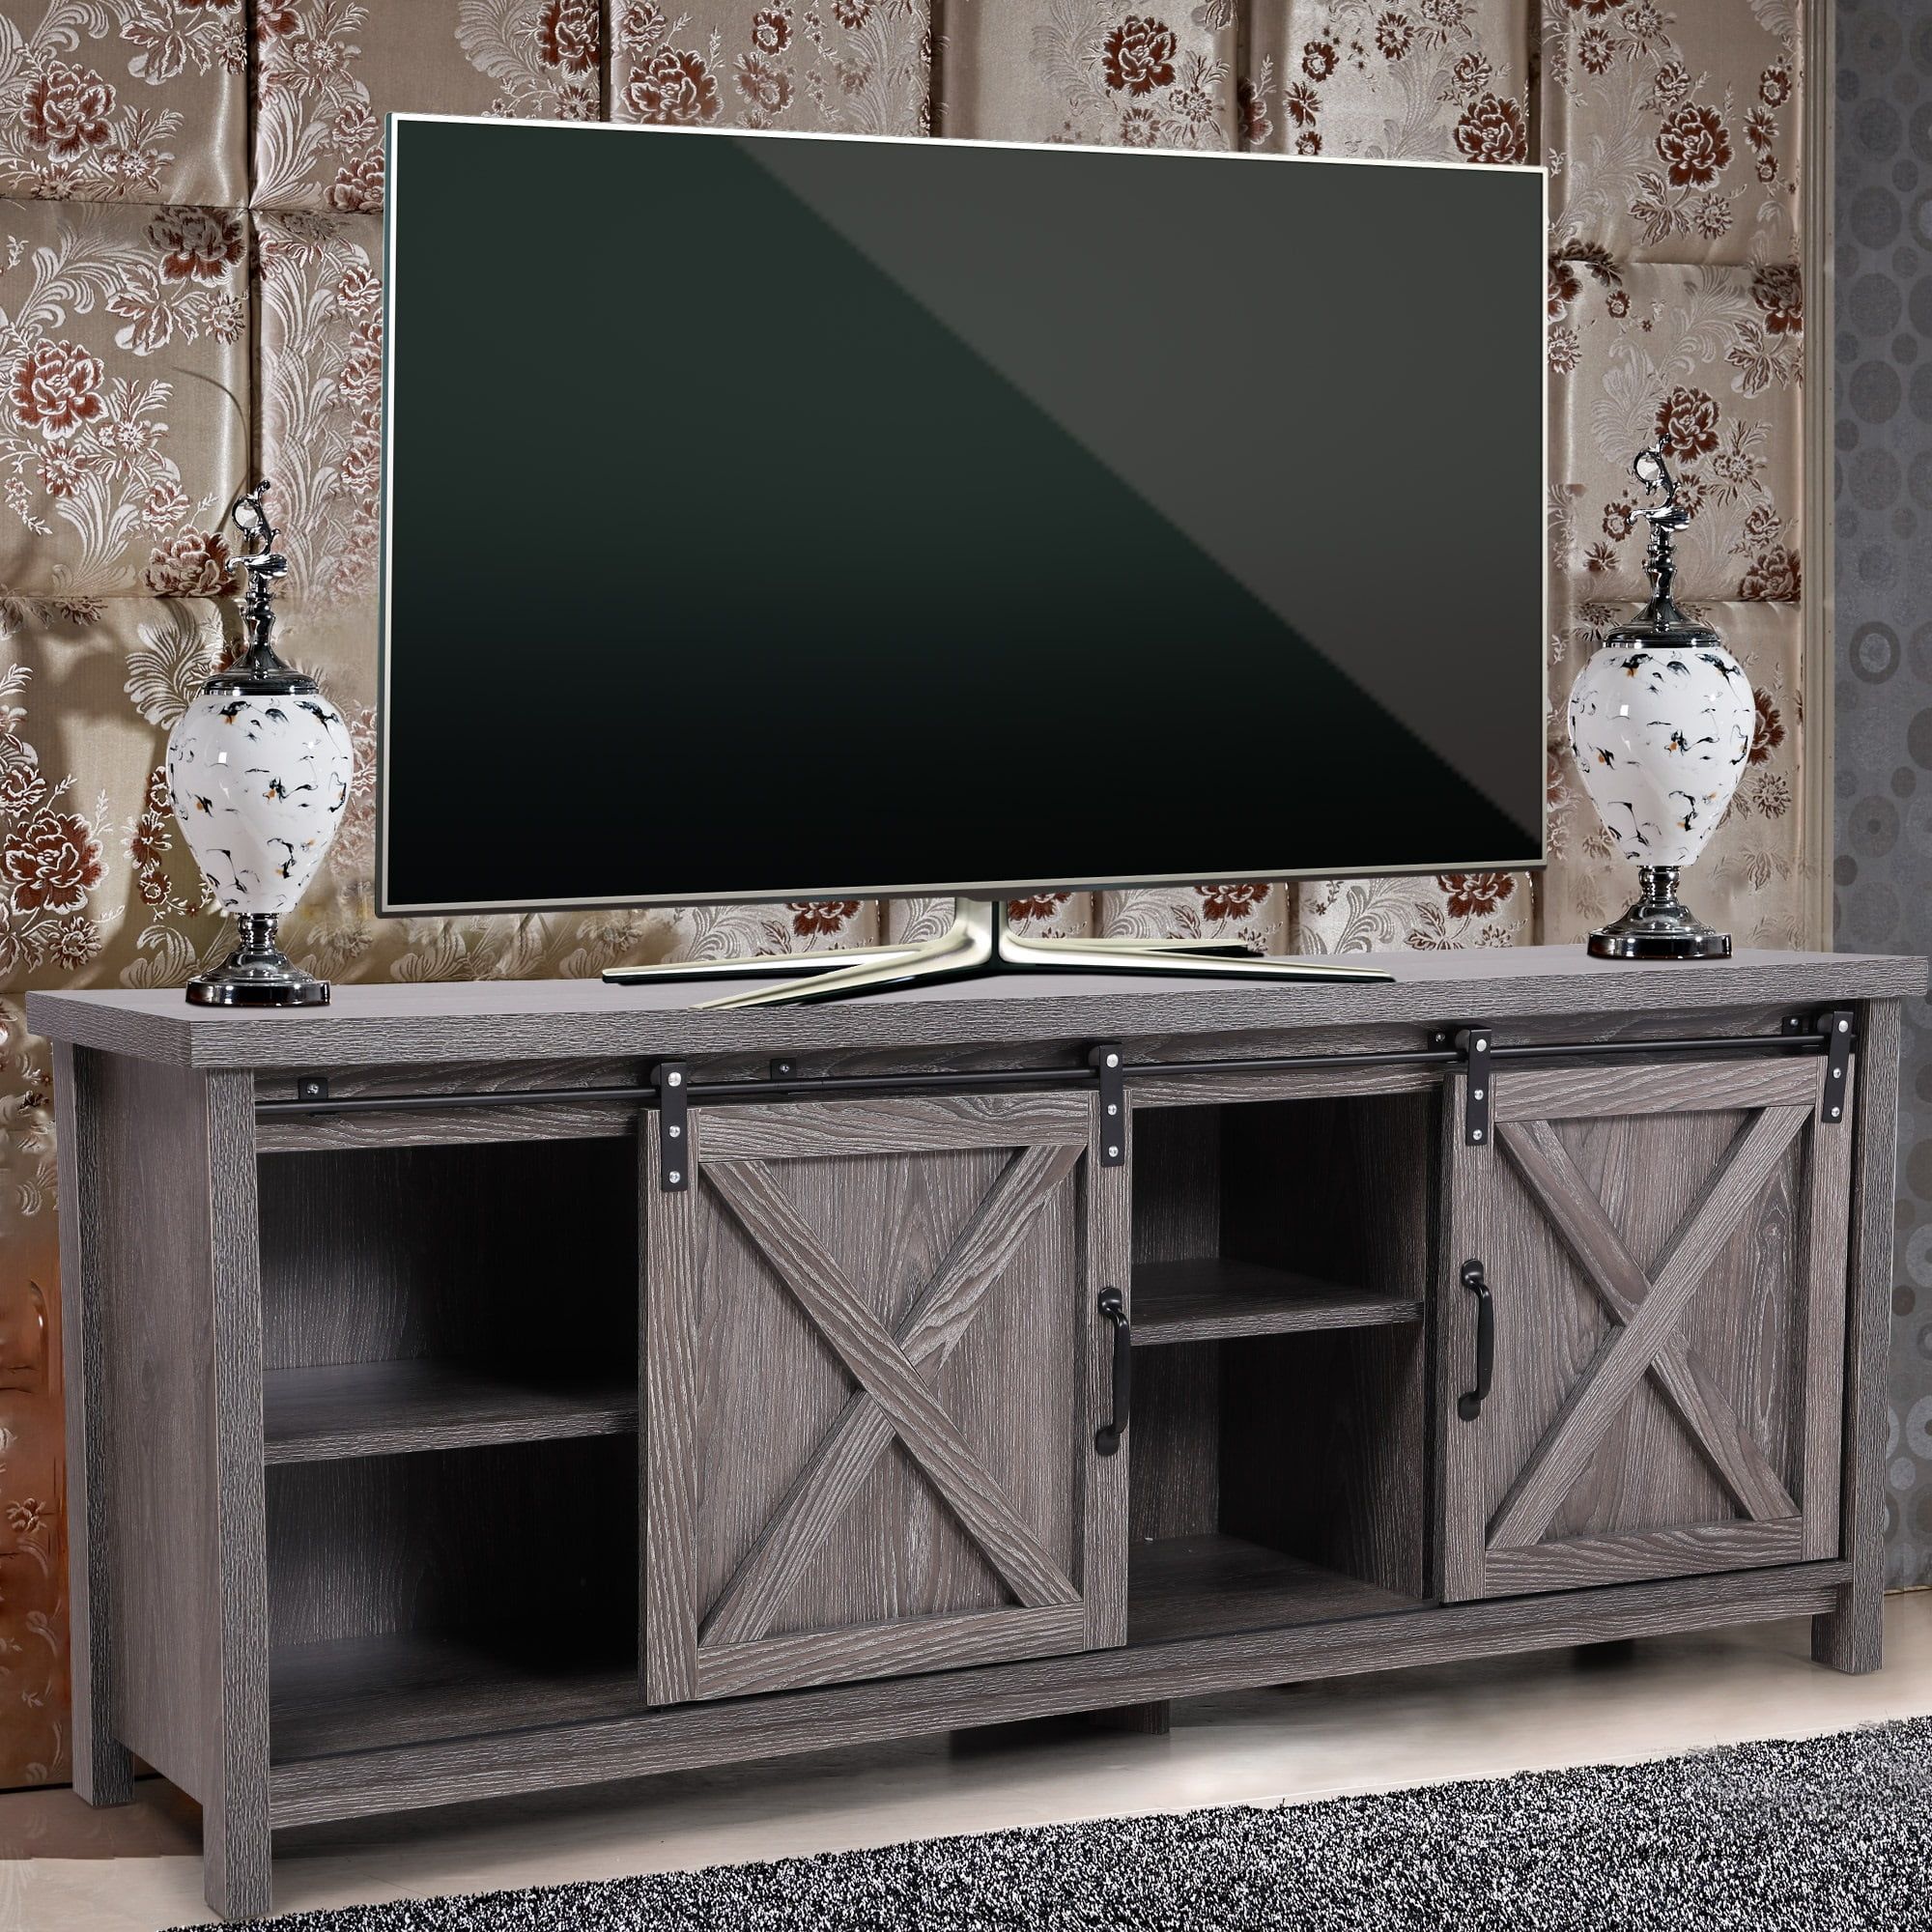 Jaxpety 58" Farmhouse Sliding Barn Door Tv Stand For Tvs Up To 65 For Entertainment Center With Storage Cabinet (Gallery 6 of 20)